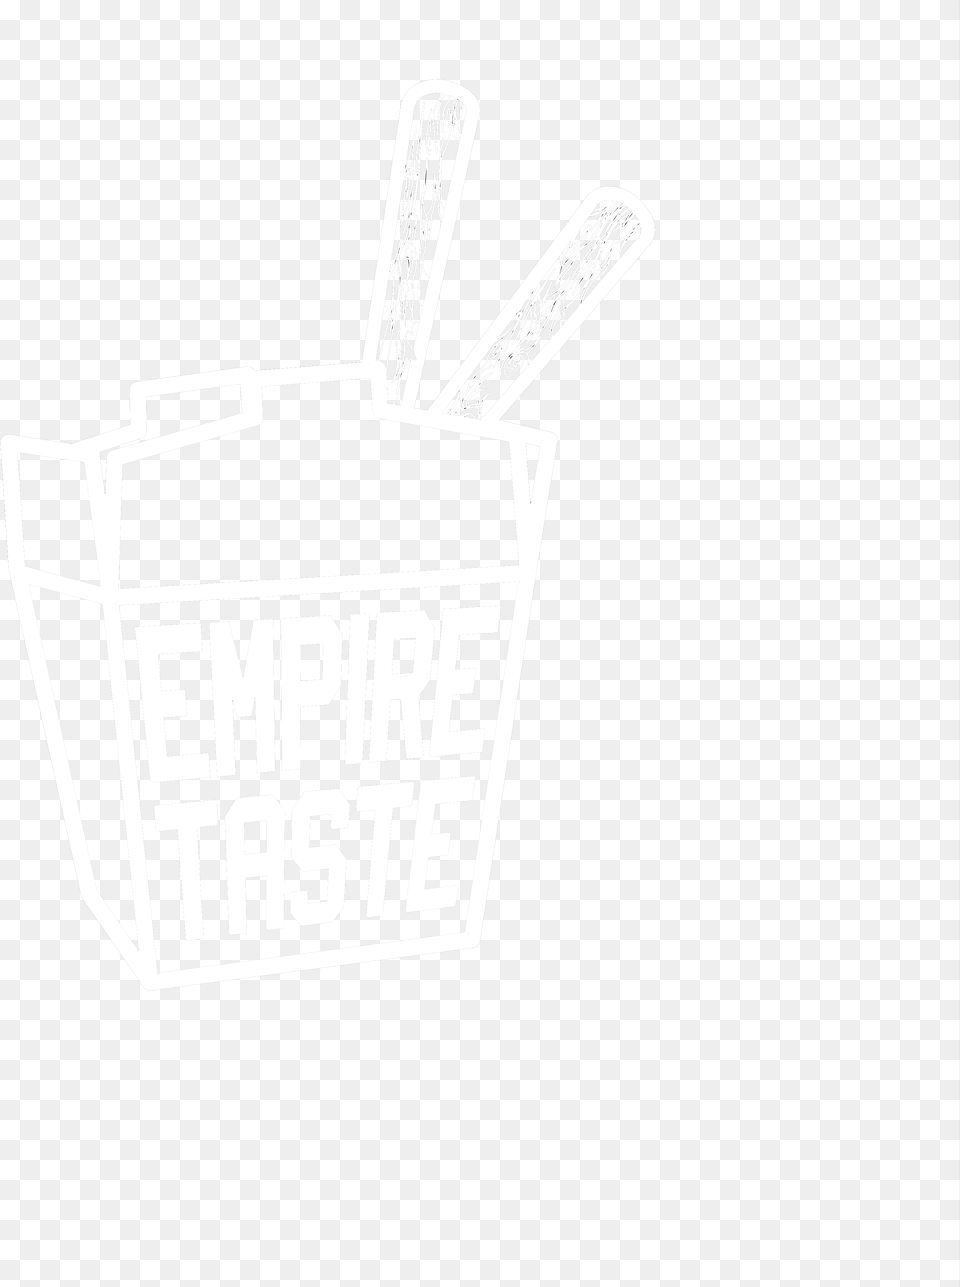 Construction Paper, Basket, Stencil, Cutlery Png Image